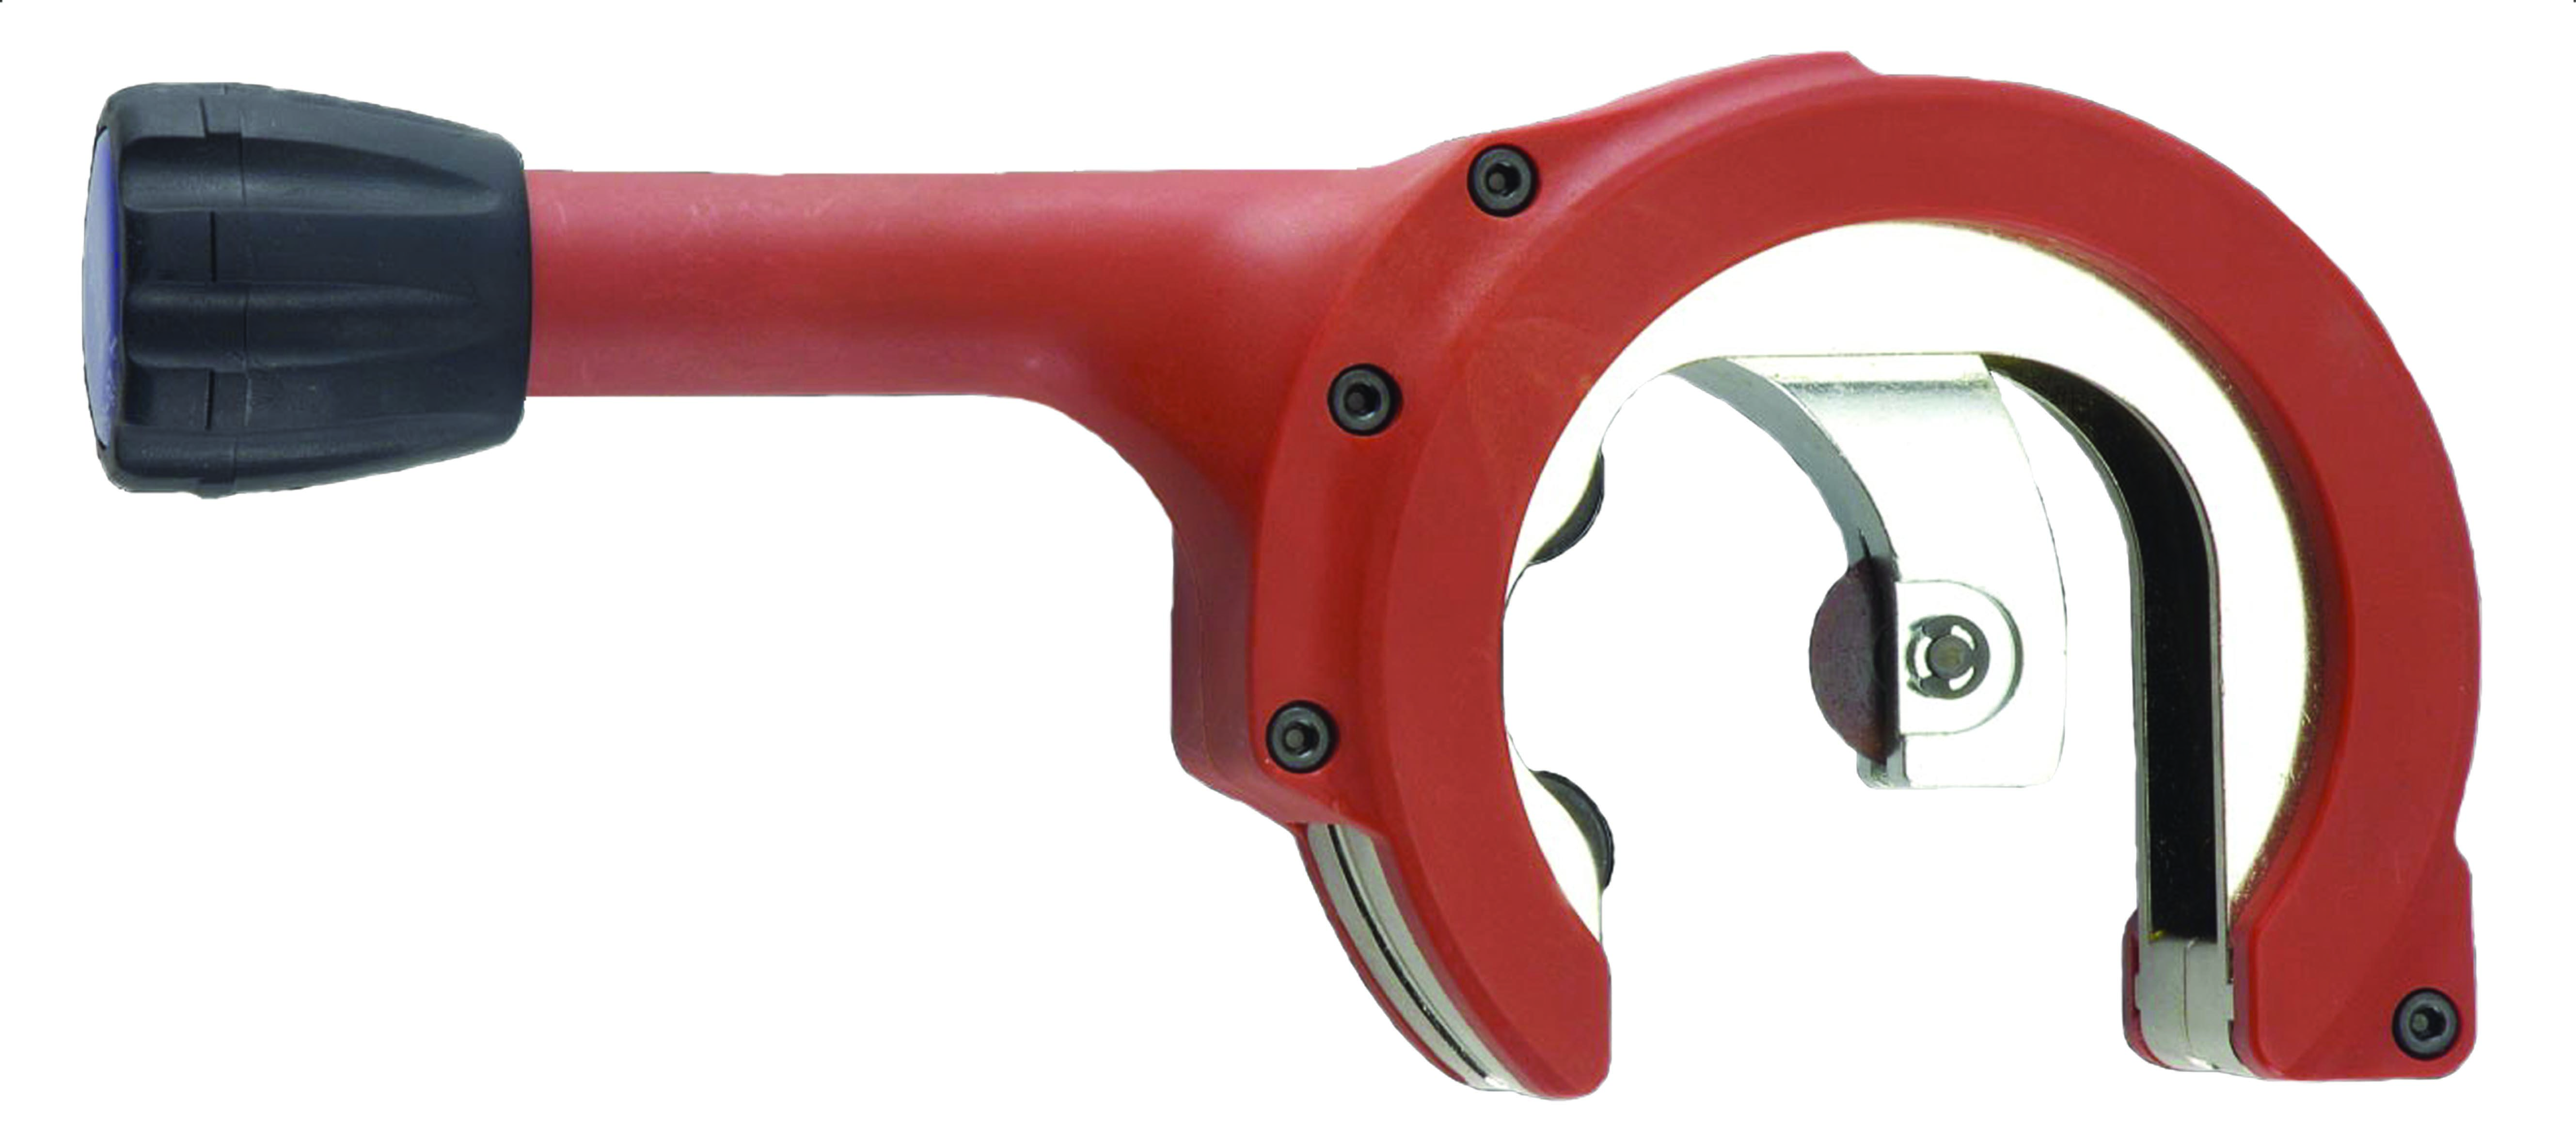 Pipe cutter with ratchet function of 28-67 mm KUNZER (7RAS01)